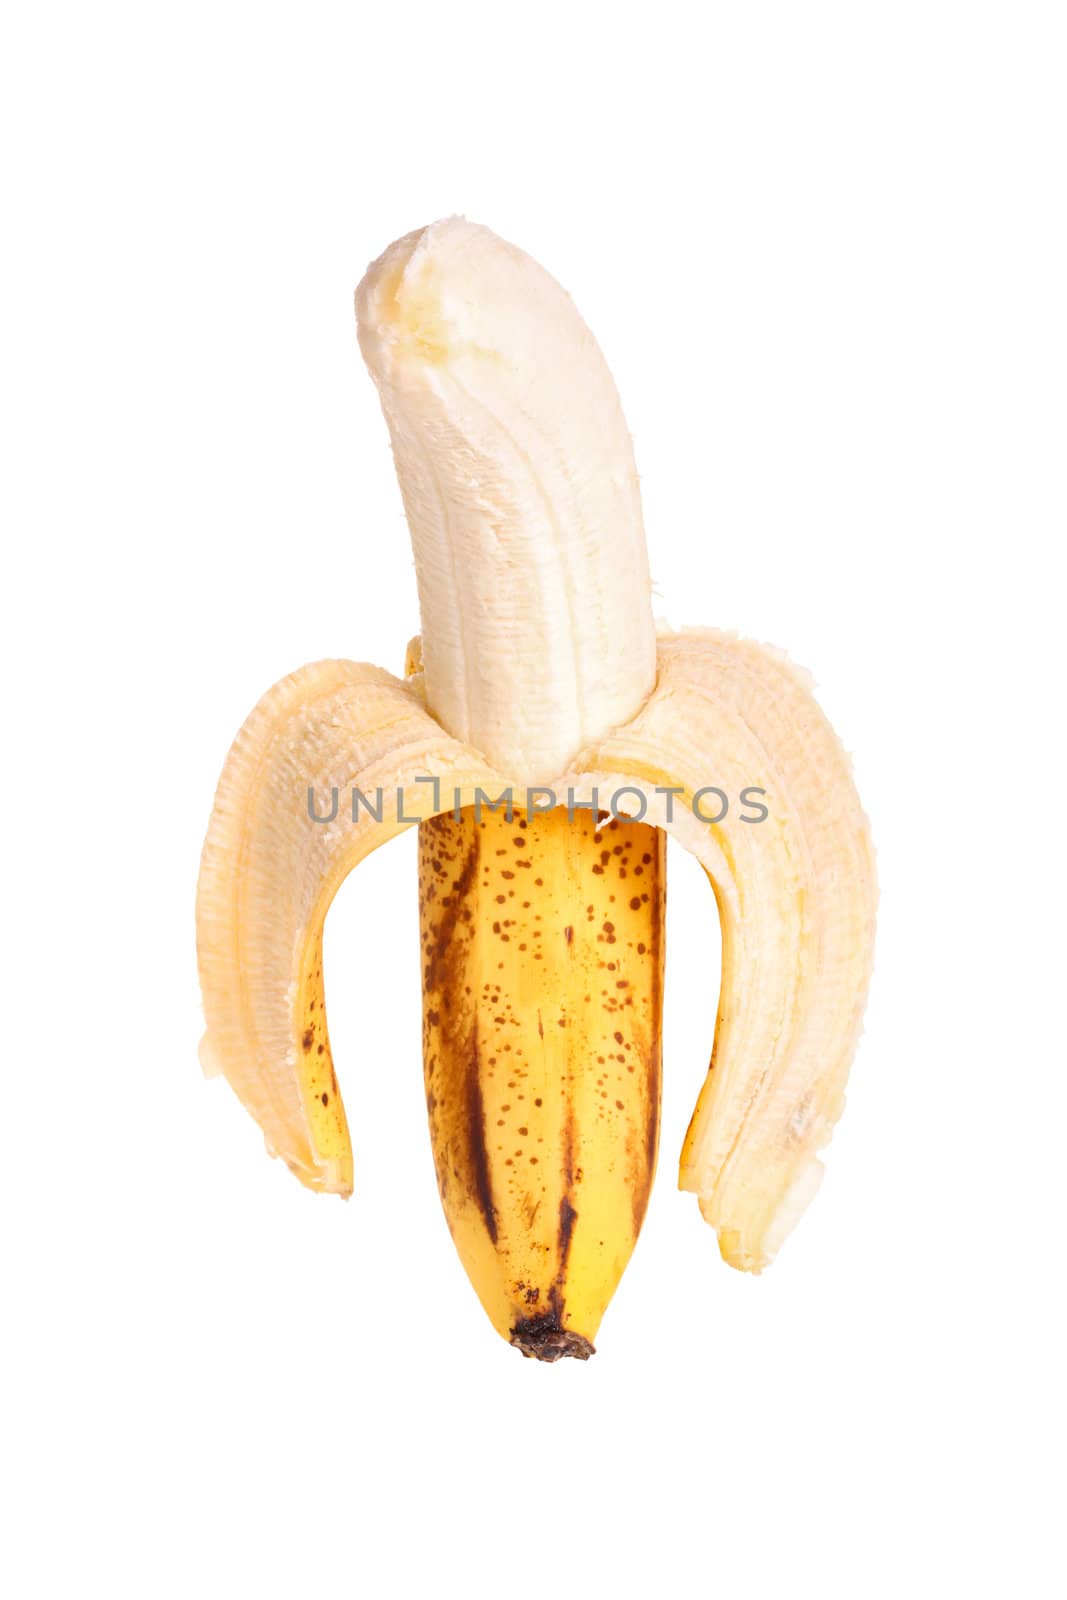 Partially peeled, ripe spotted banana by sgoodwin4813